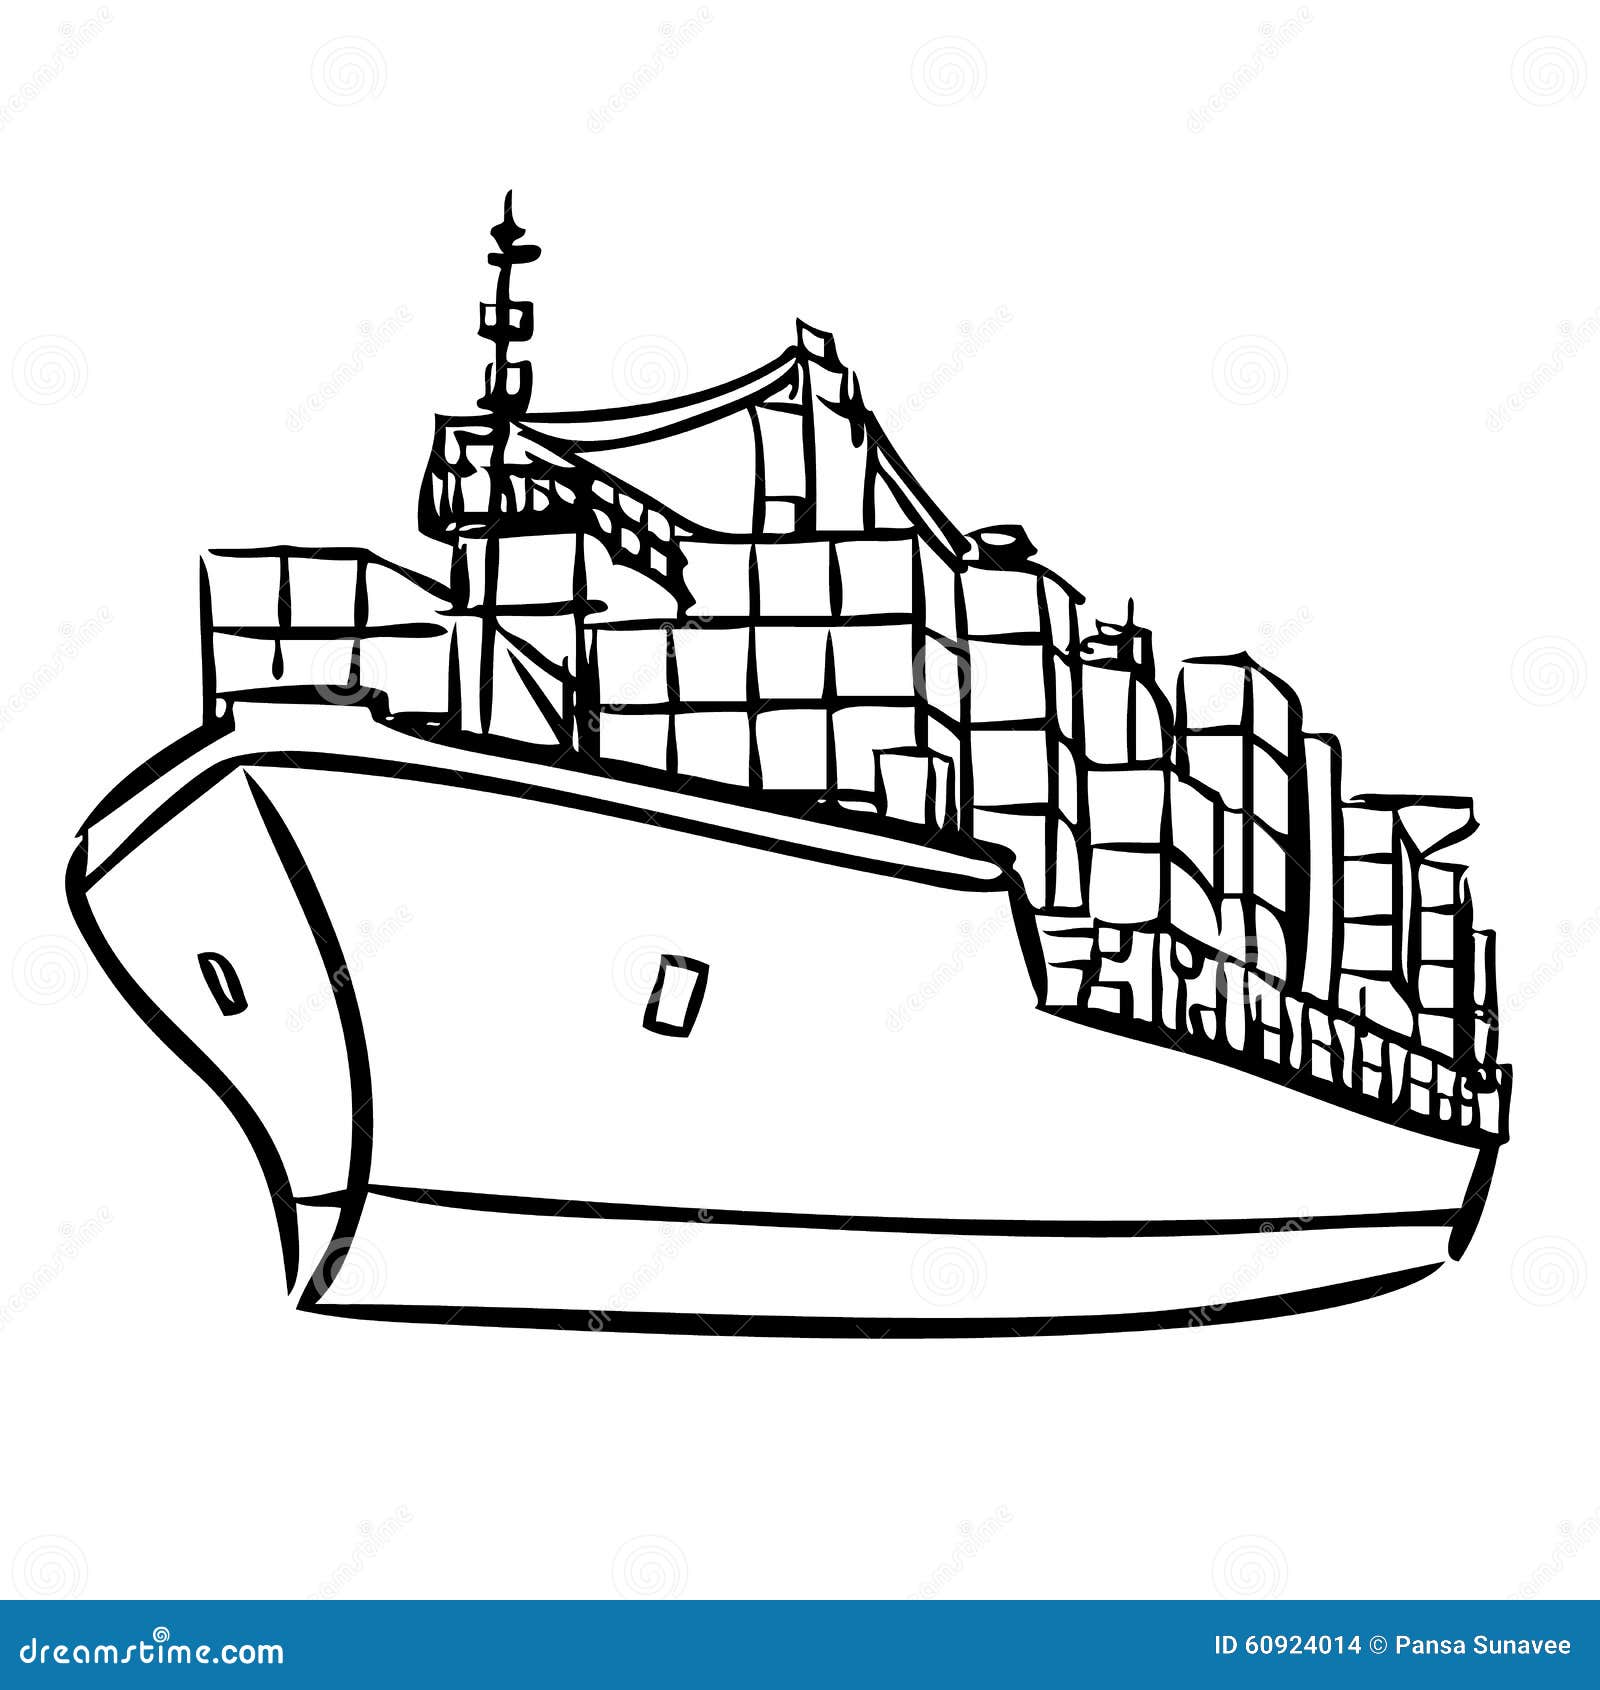 clipart container vessel - photo #45